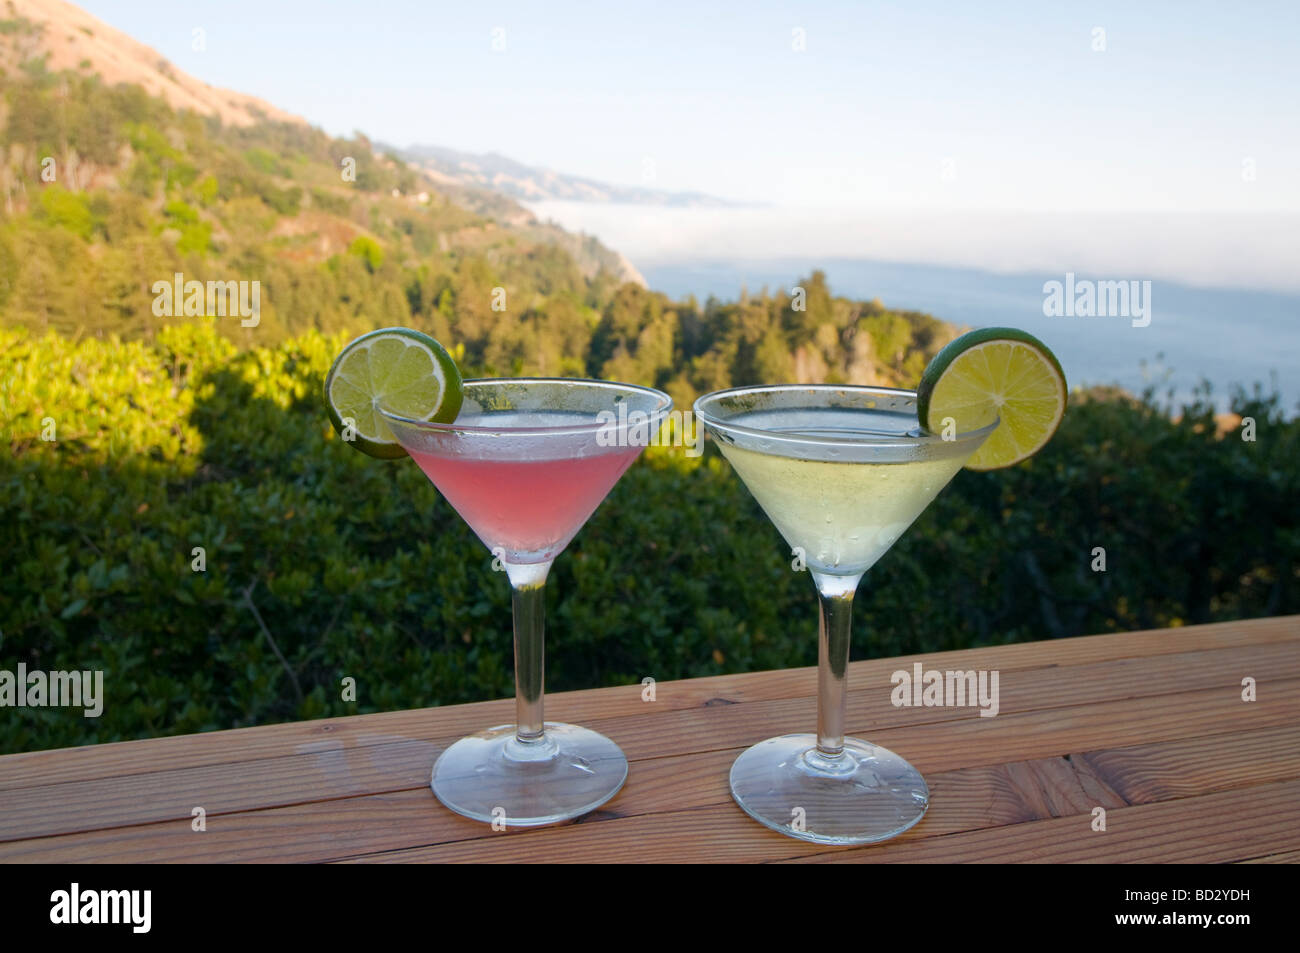 Cocktails on the bar at Nepenthe restaurant overlooking  Big Sur California coast Stock Photo